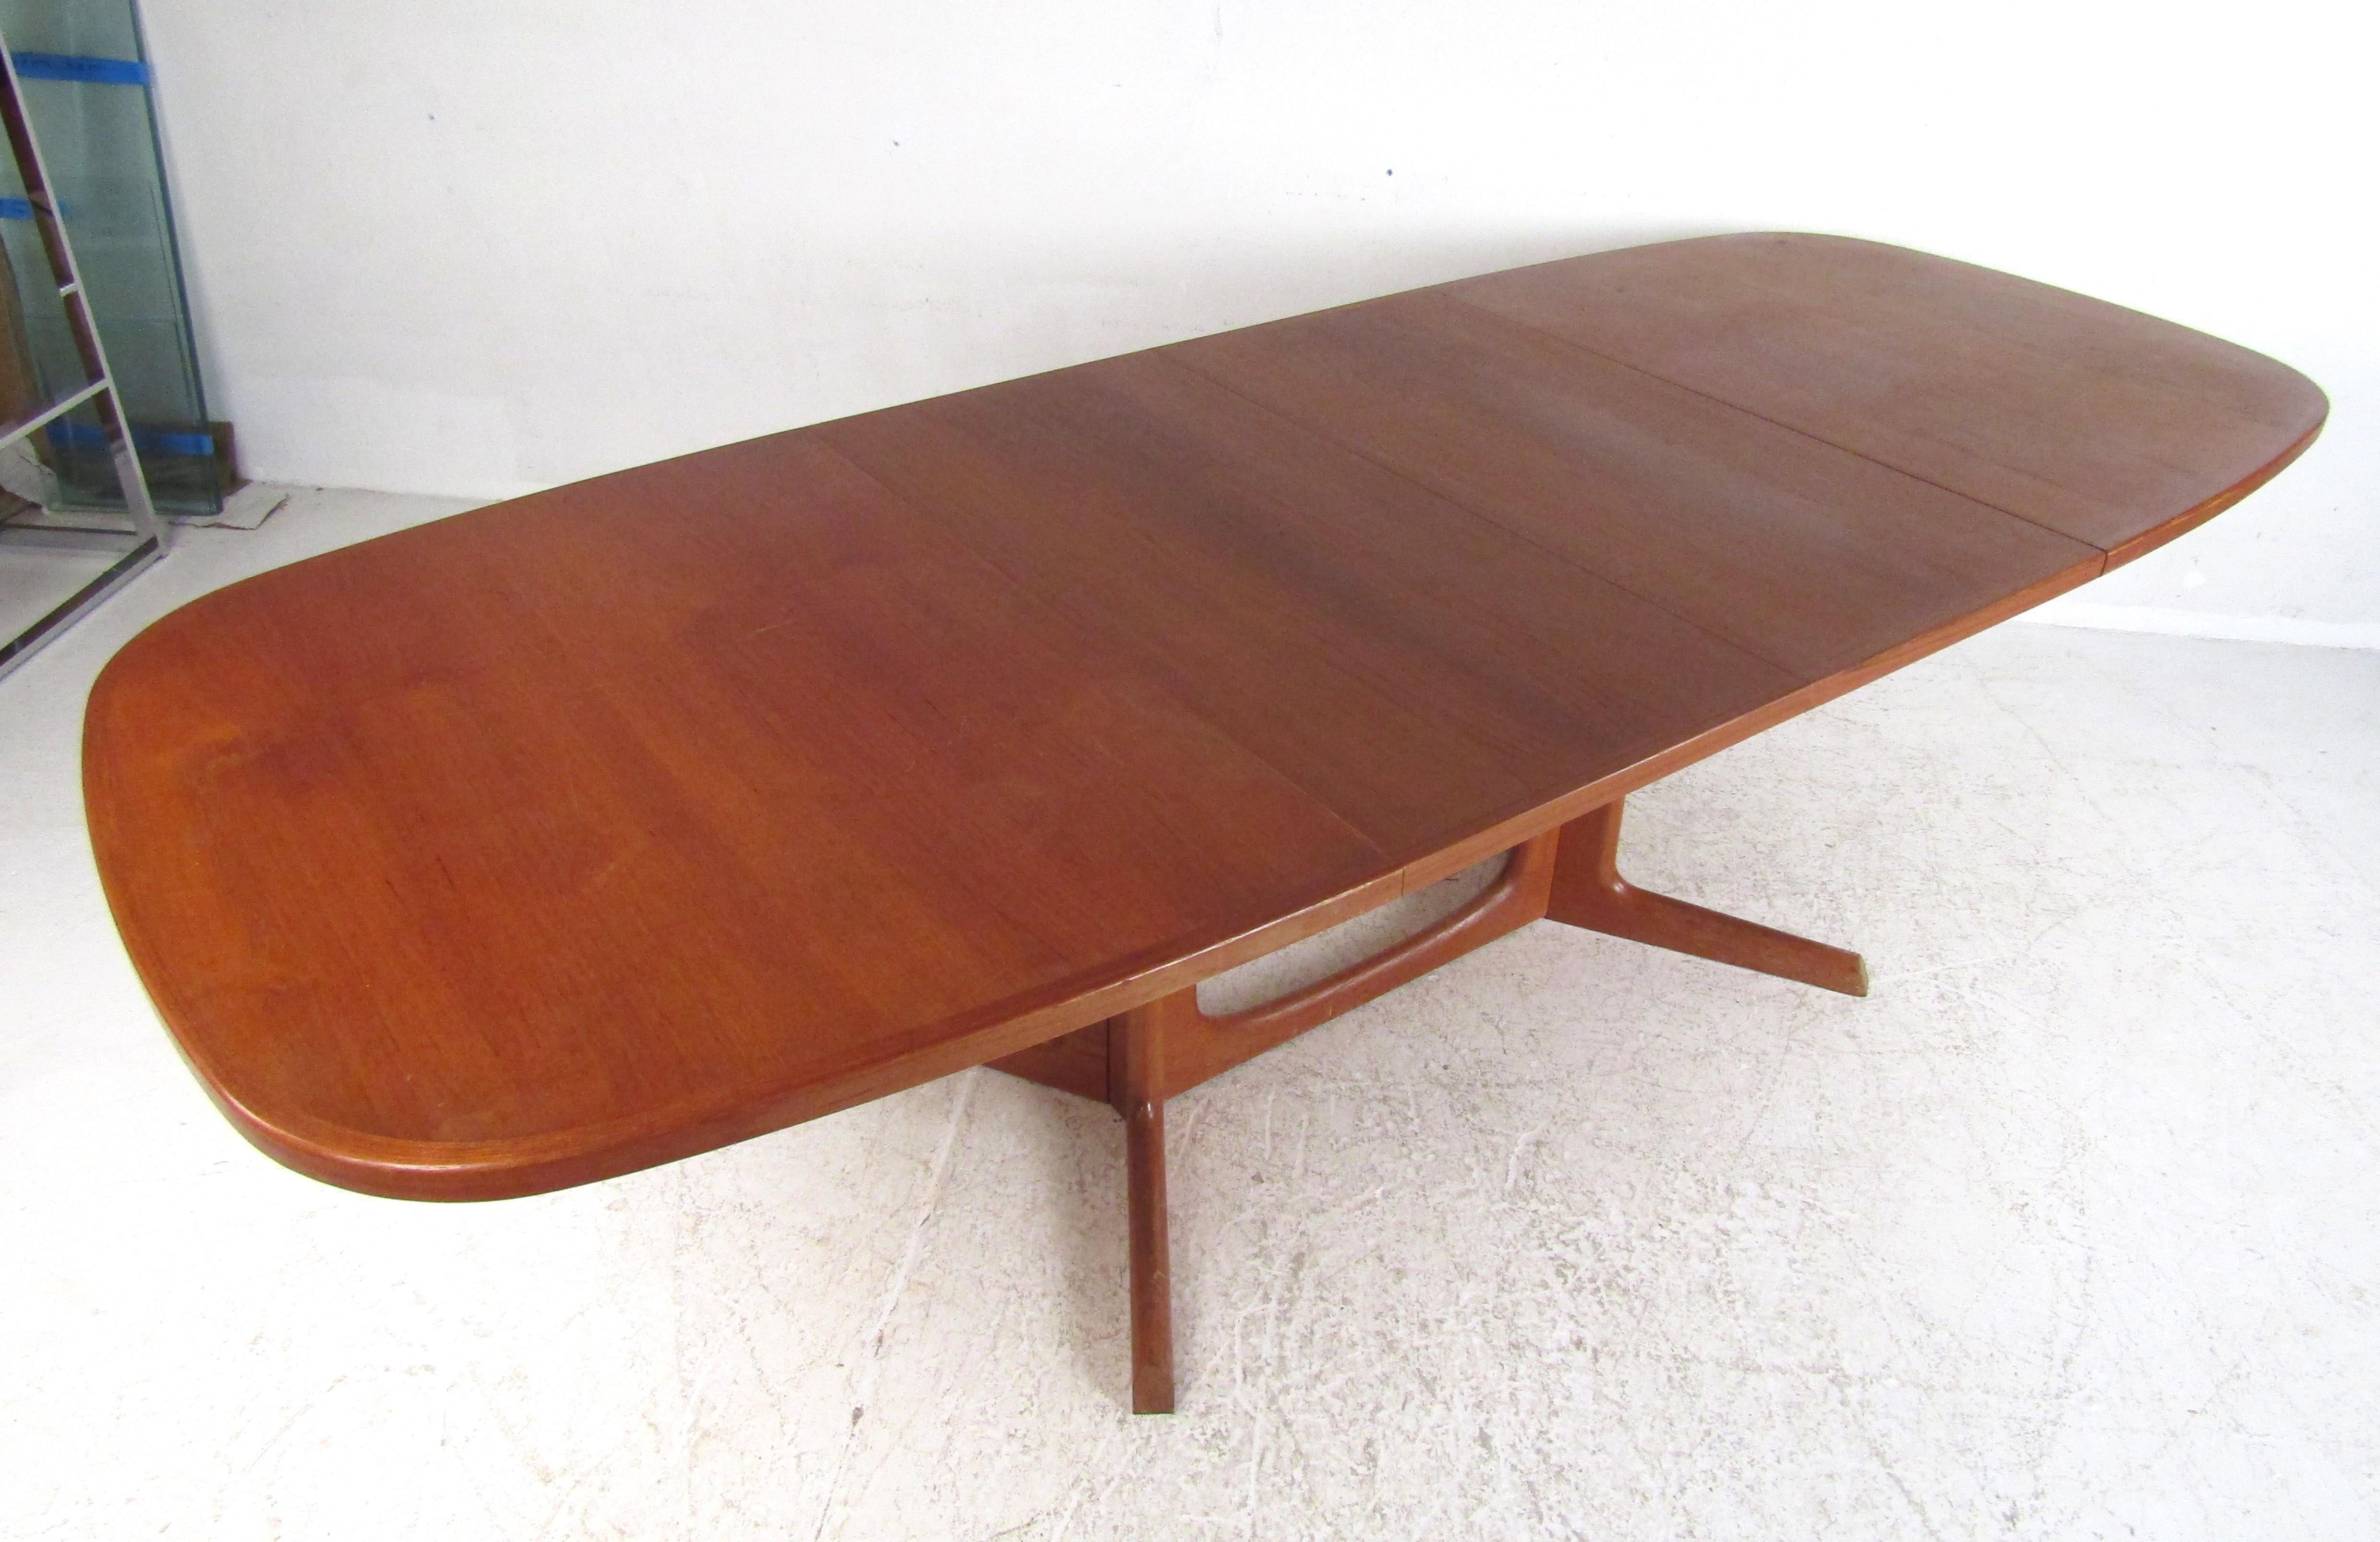 Exquisite midcentury Danish modern dining table that includes two leaves allowing this table to go from 63.5 inches wide to 102 inches wide. A well-made Danish design stamped by the manufacturer with an extremely rich vintage teak finish. The smooth